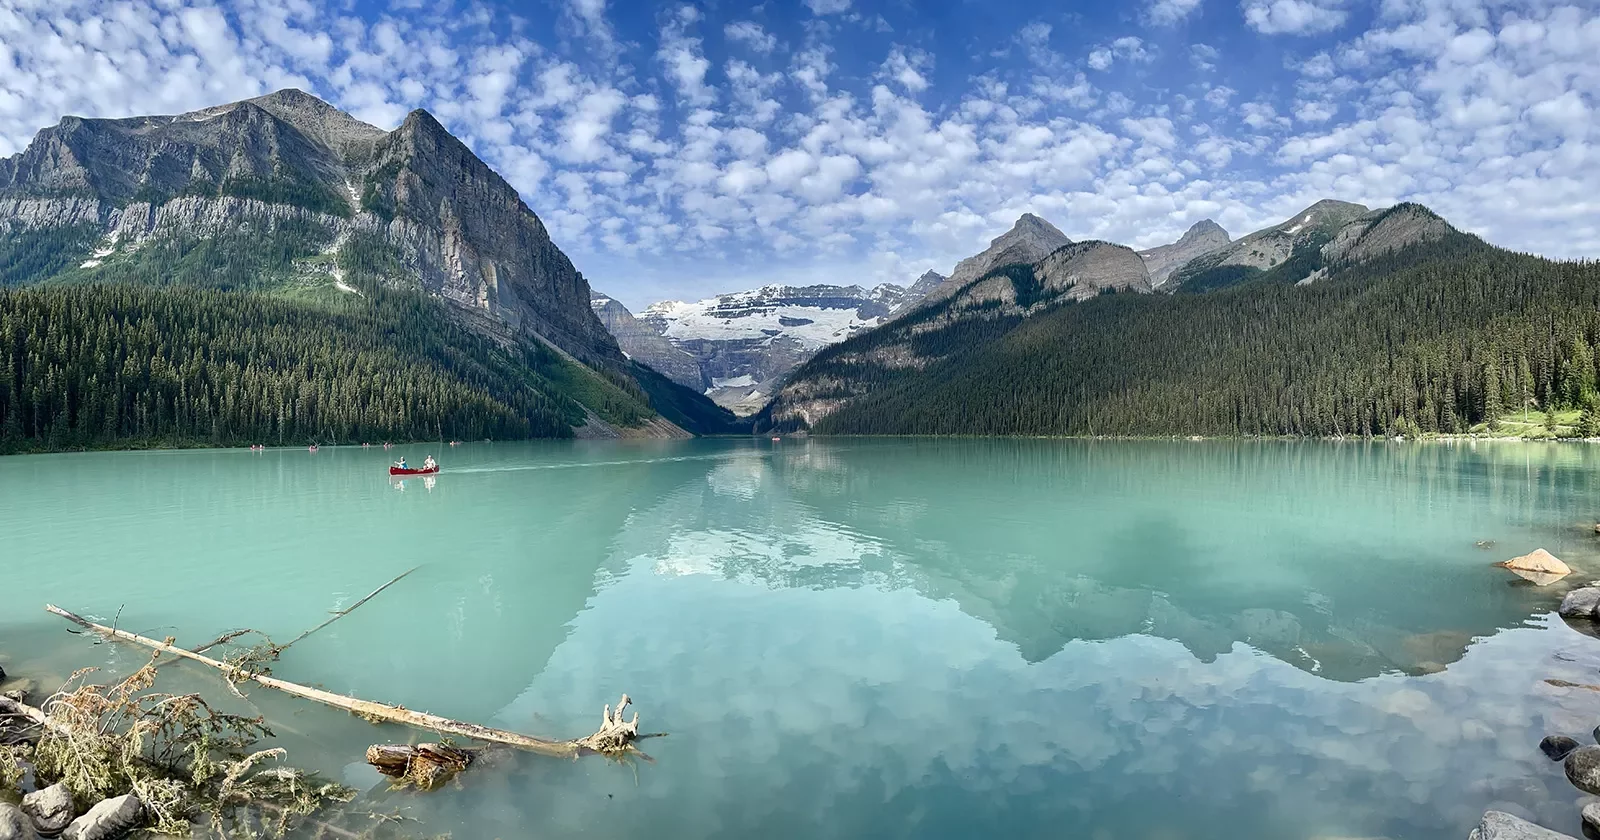 Wide shot of large blue lake, people canoeing in distance, mountains, clouds, sky in background.